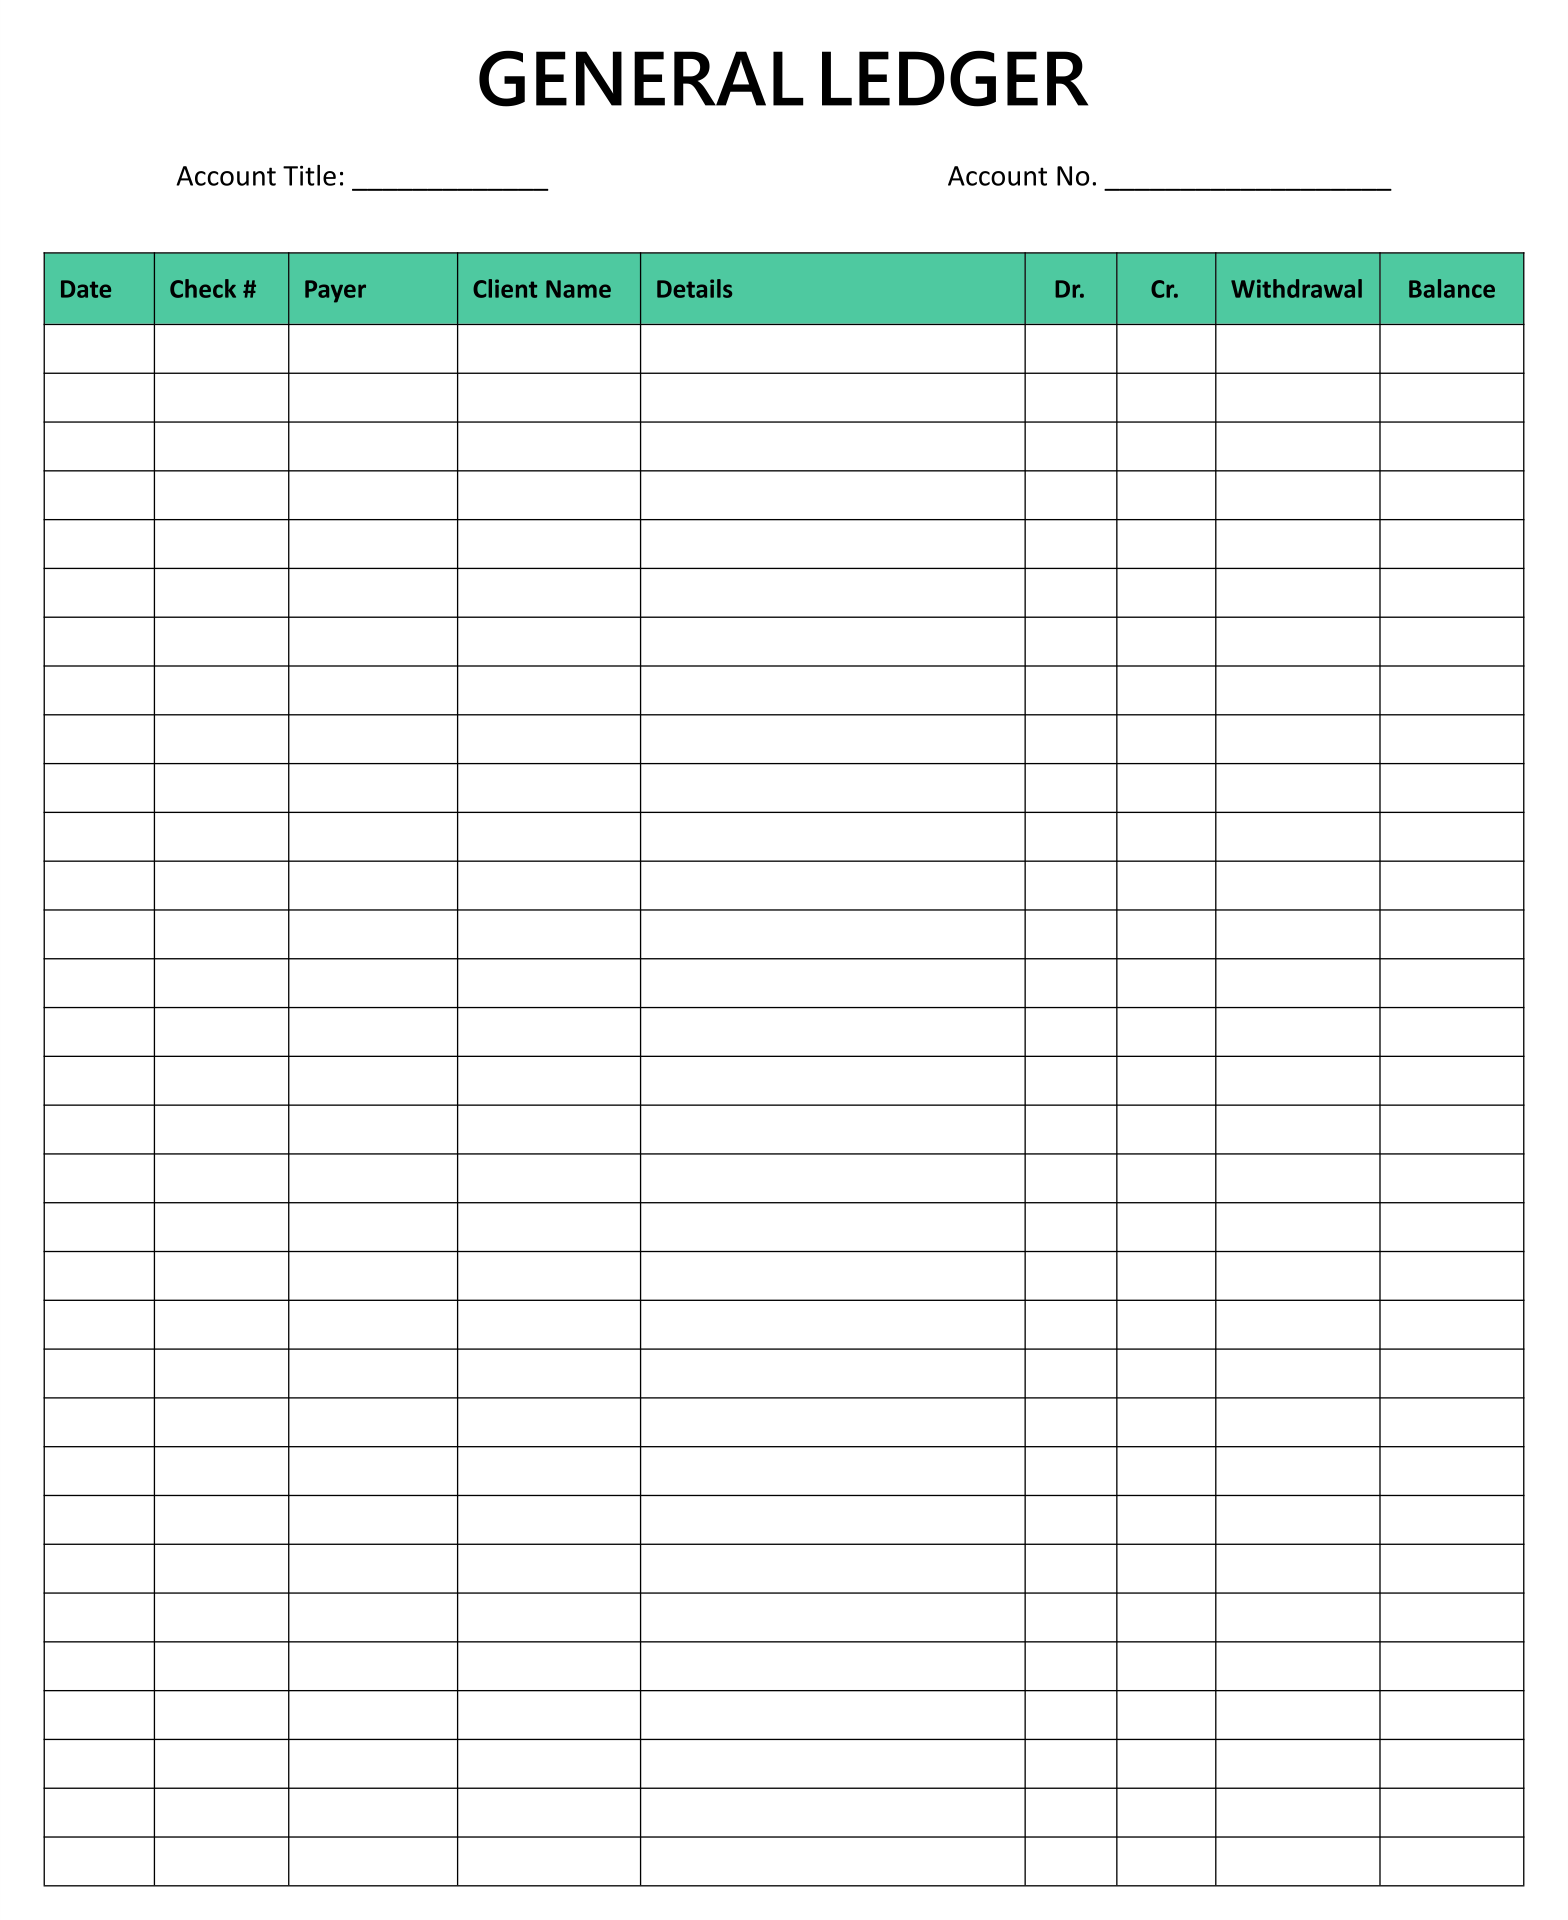 form-printable-free-home-ledger-simple-printable-forms-free-online